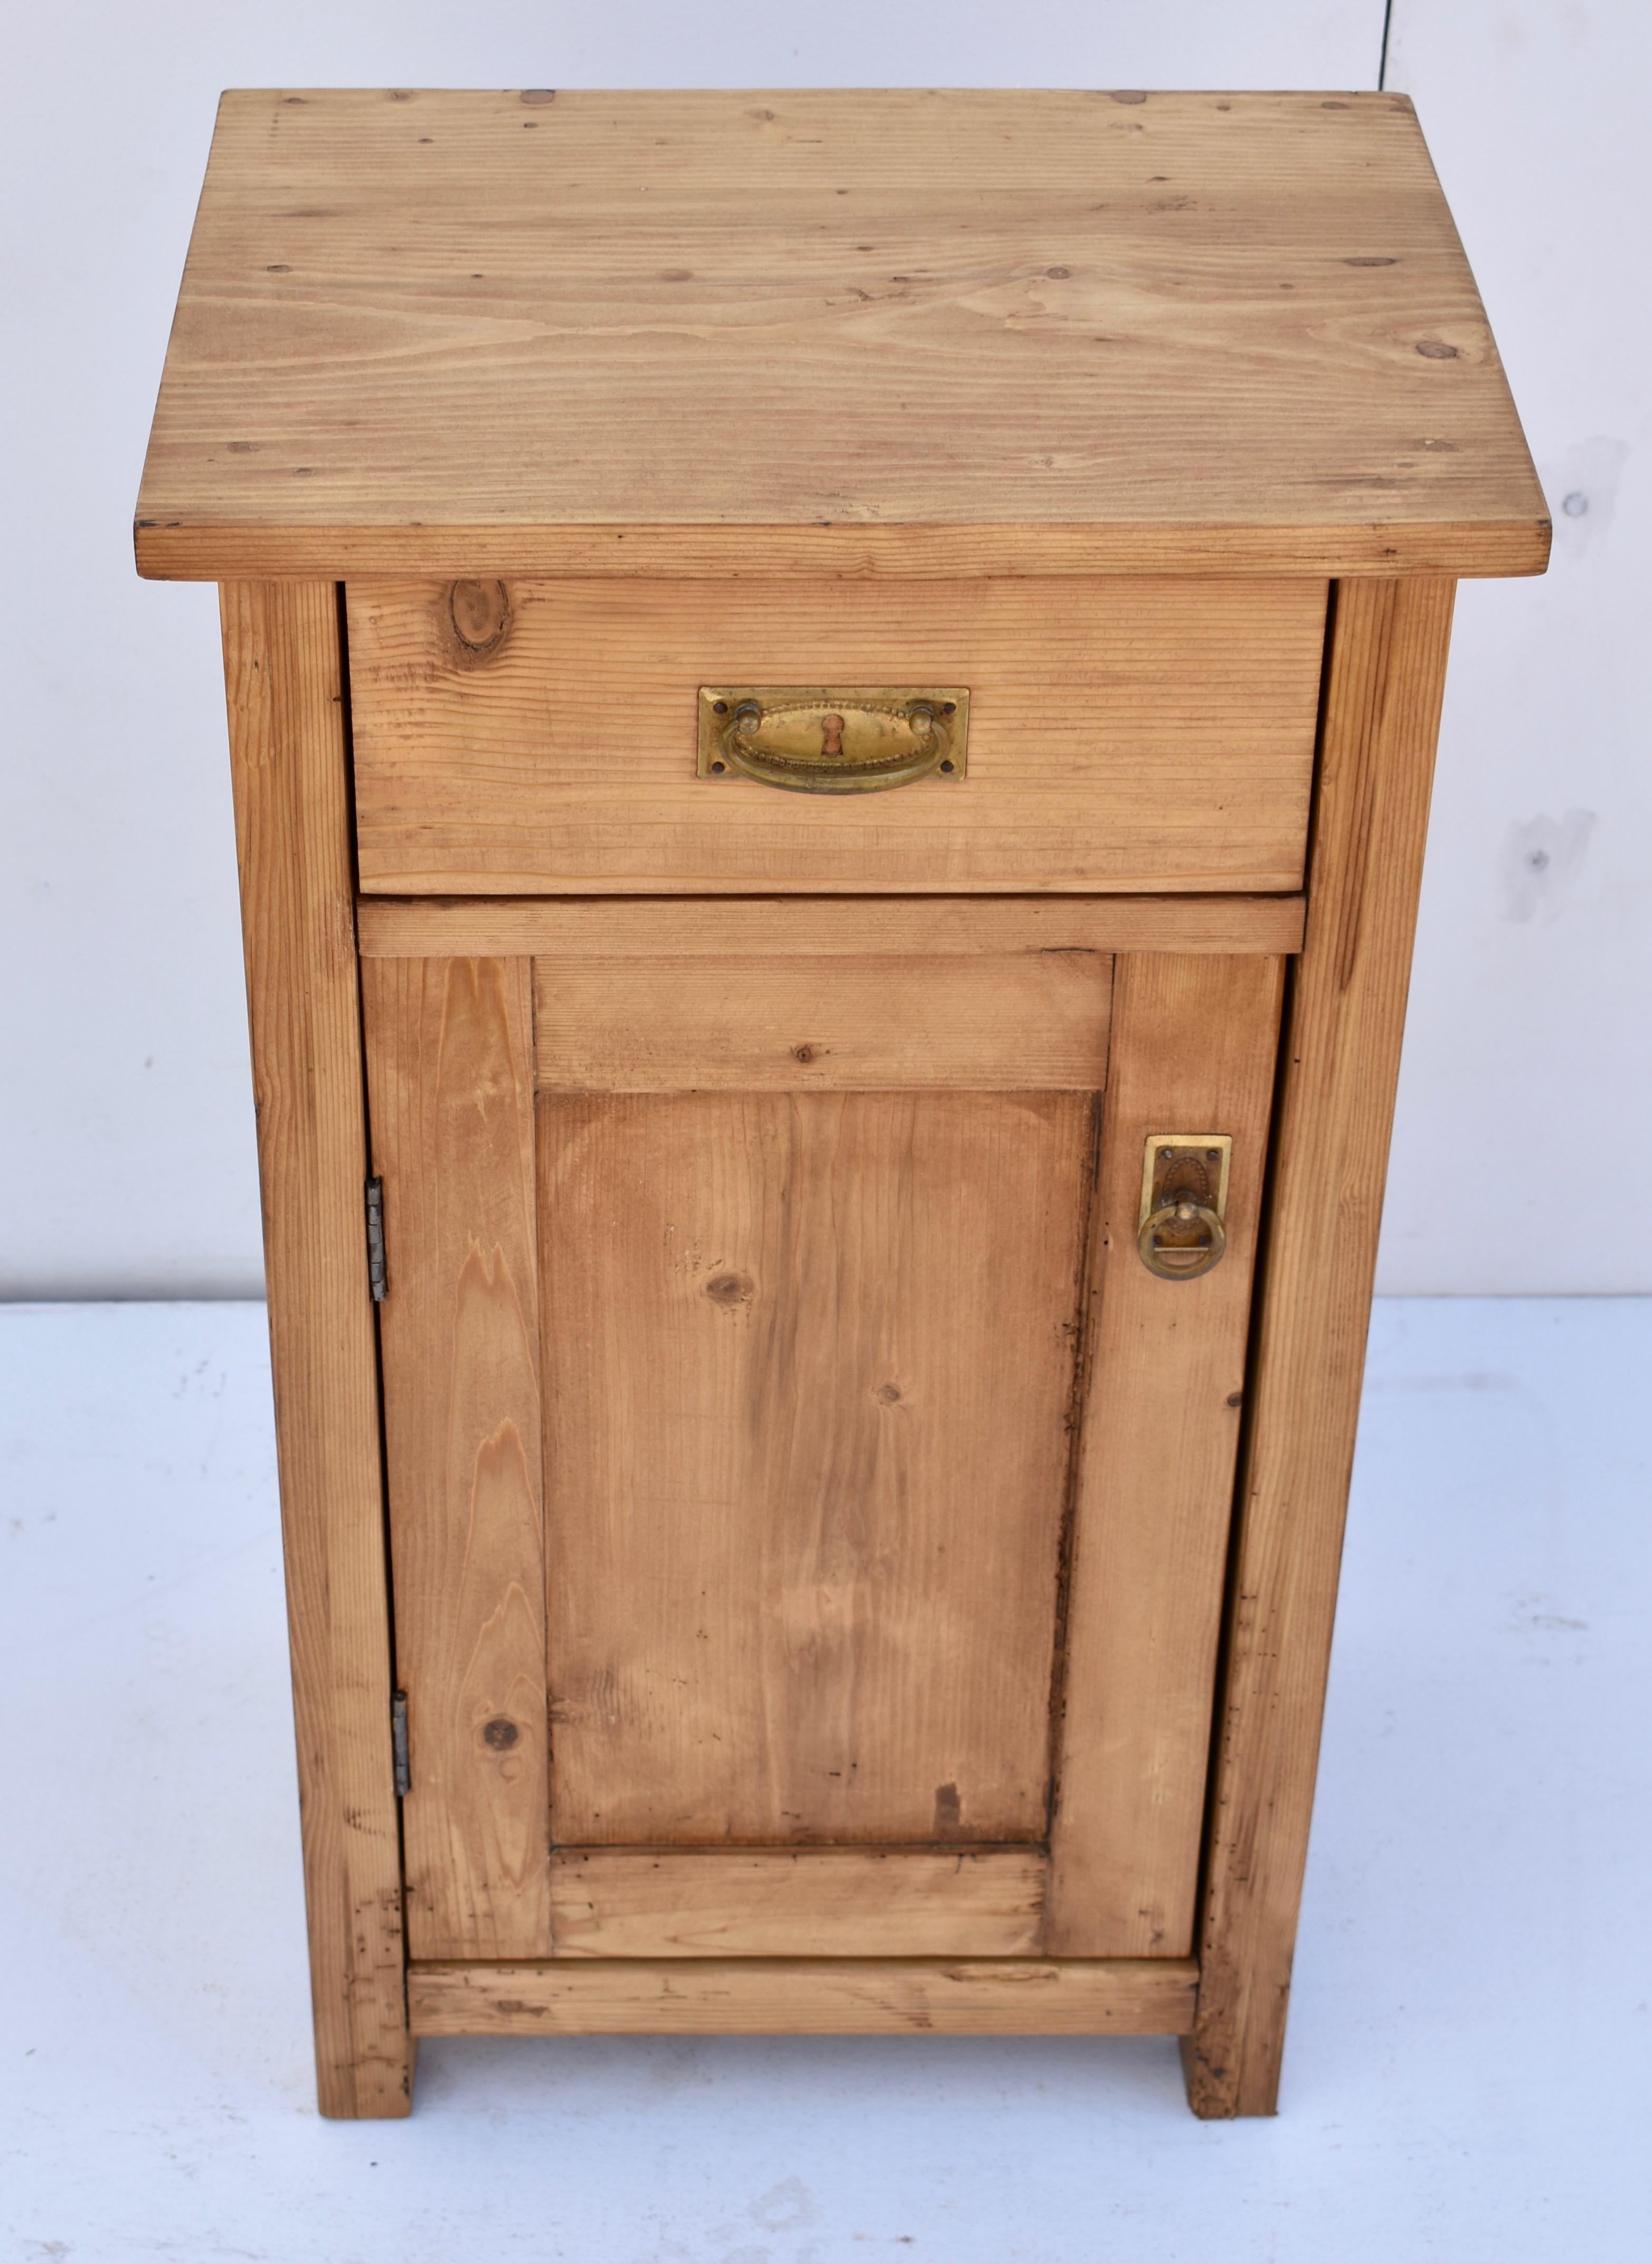 This is a plain and simple pine nightstand with one door and one door with a single shelf inside. The front corners of the top and the base are nicely rounded. In a lovely blond tone.
   